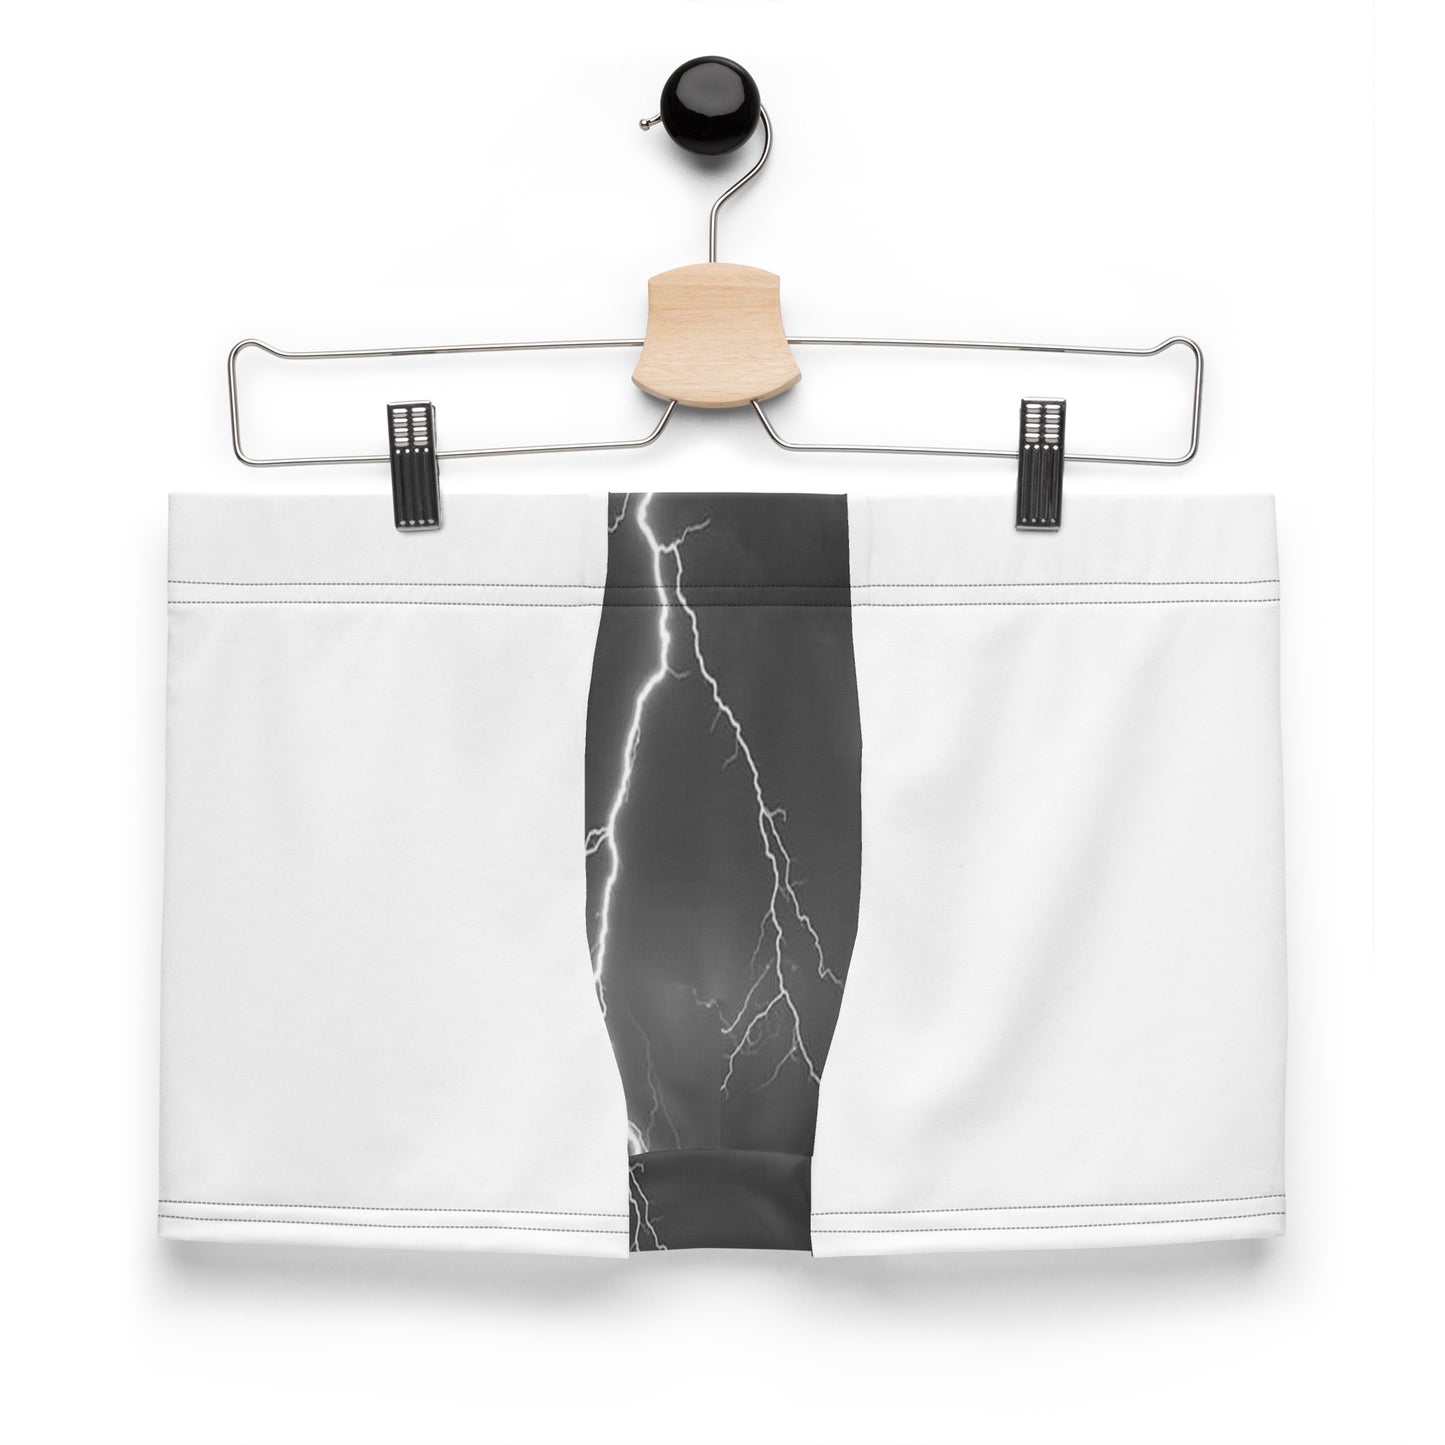 The B.E. Style Brand "I AM THE STORM" Boxer Briefs